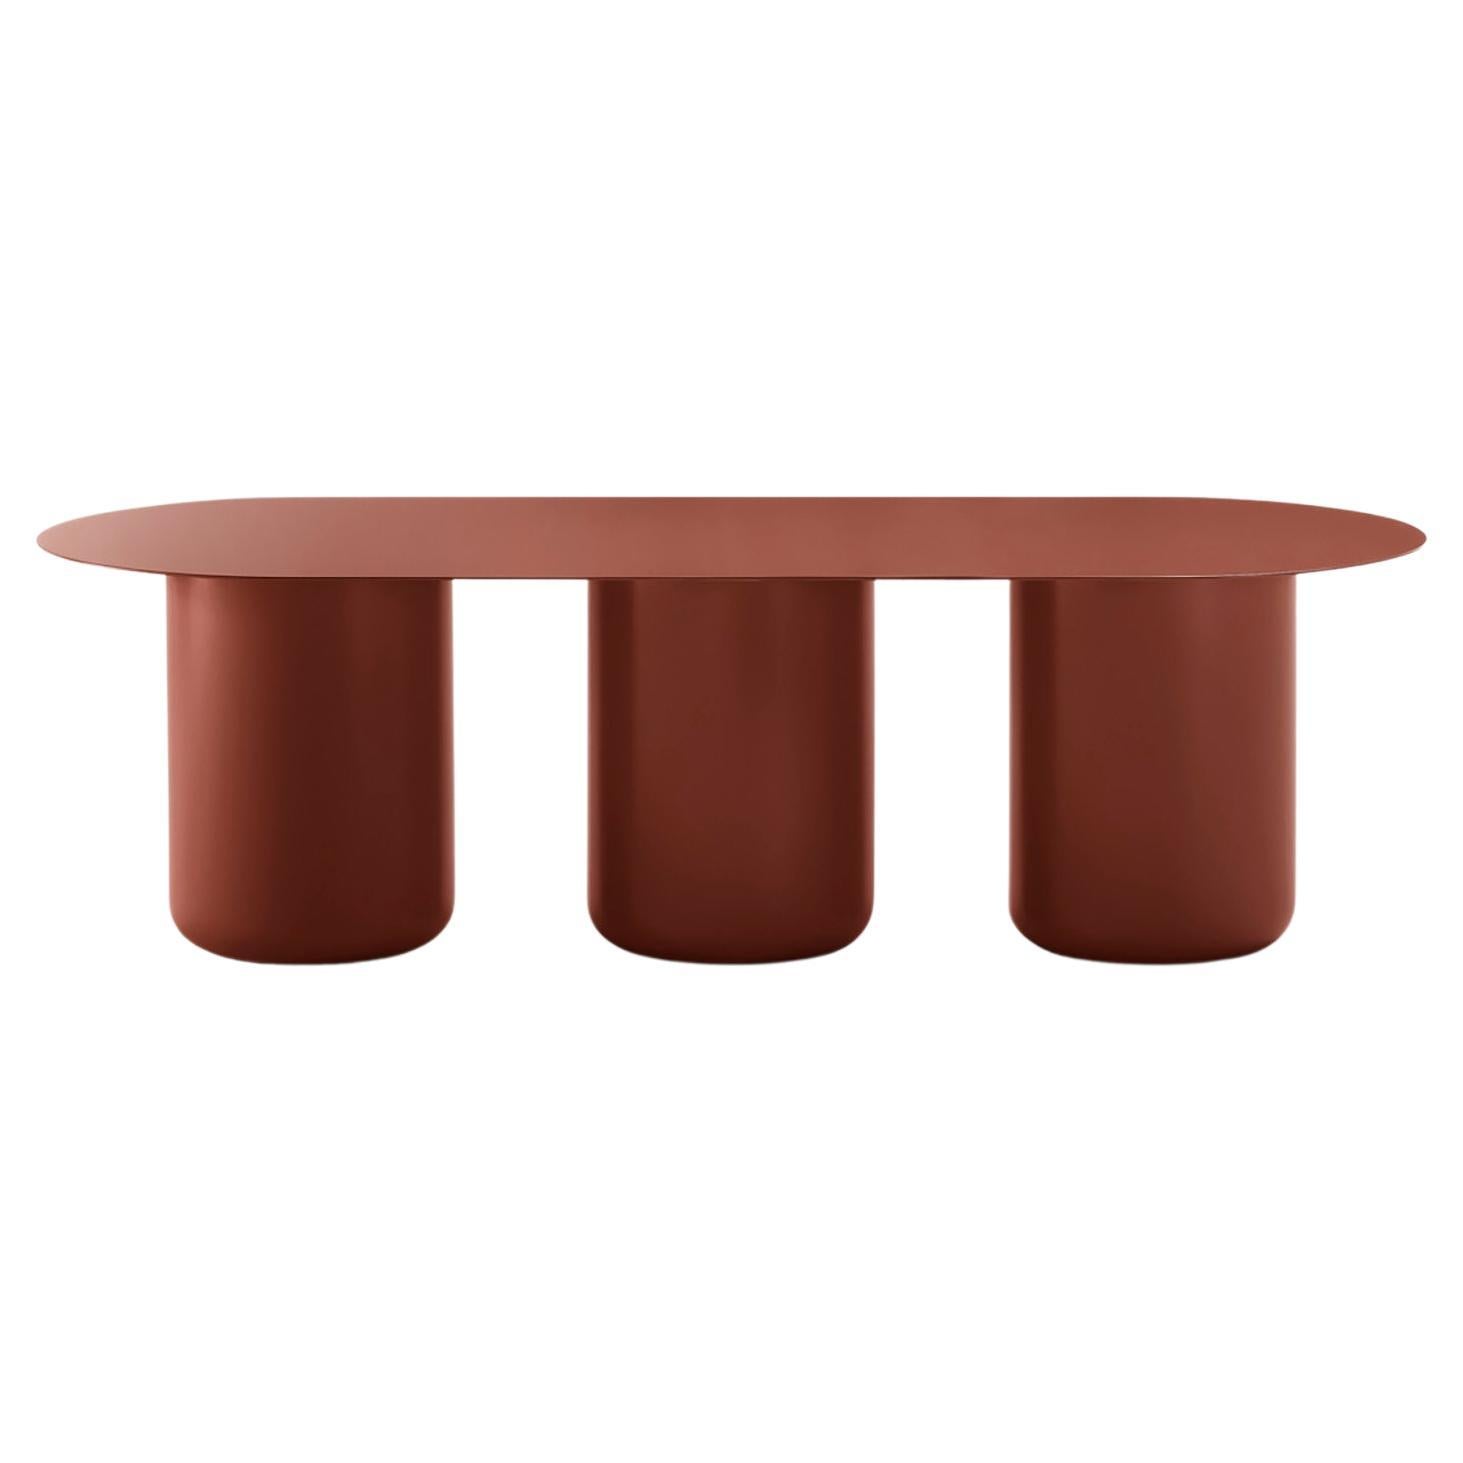 Headland Red Table 03 by Coco Flip For Sale